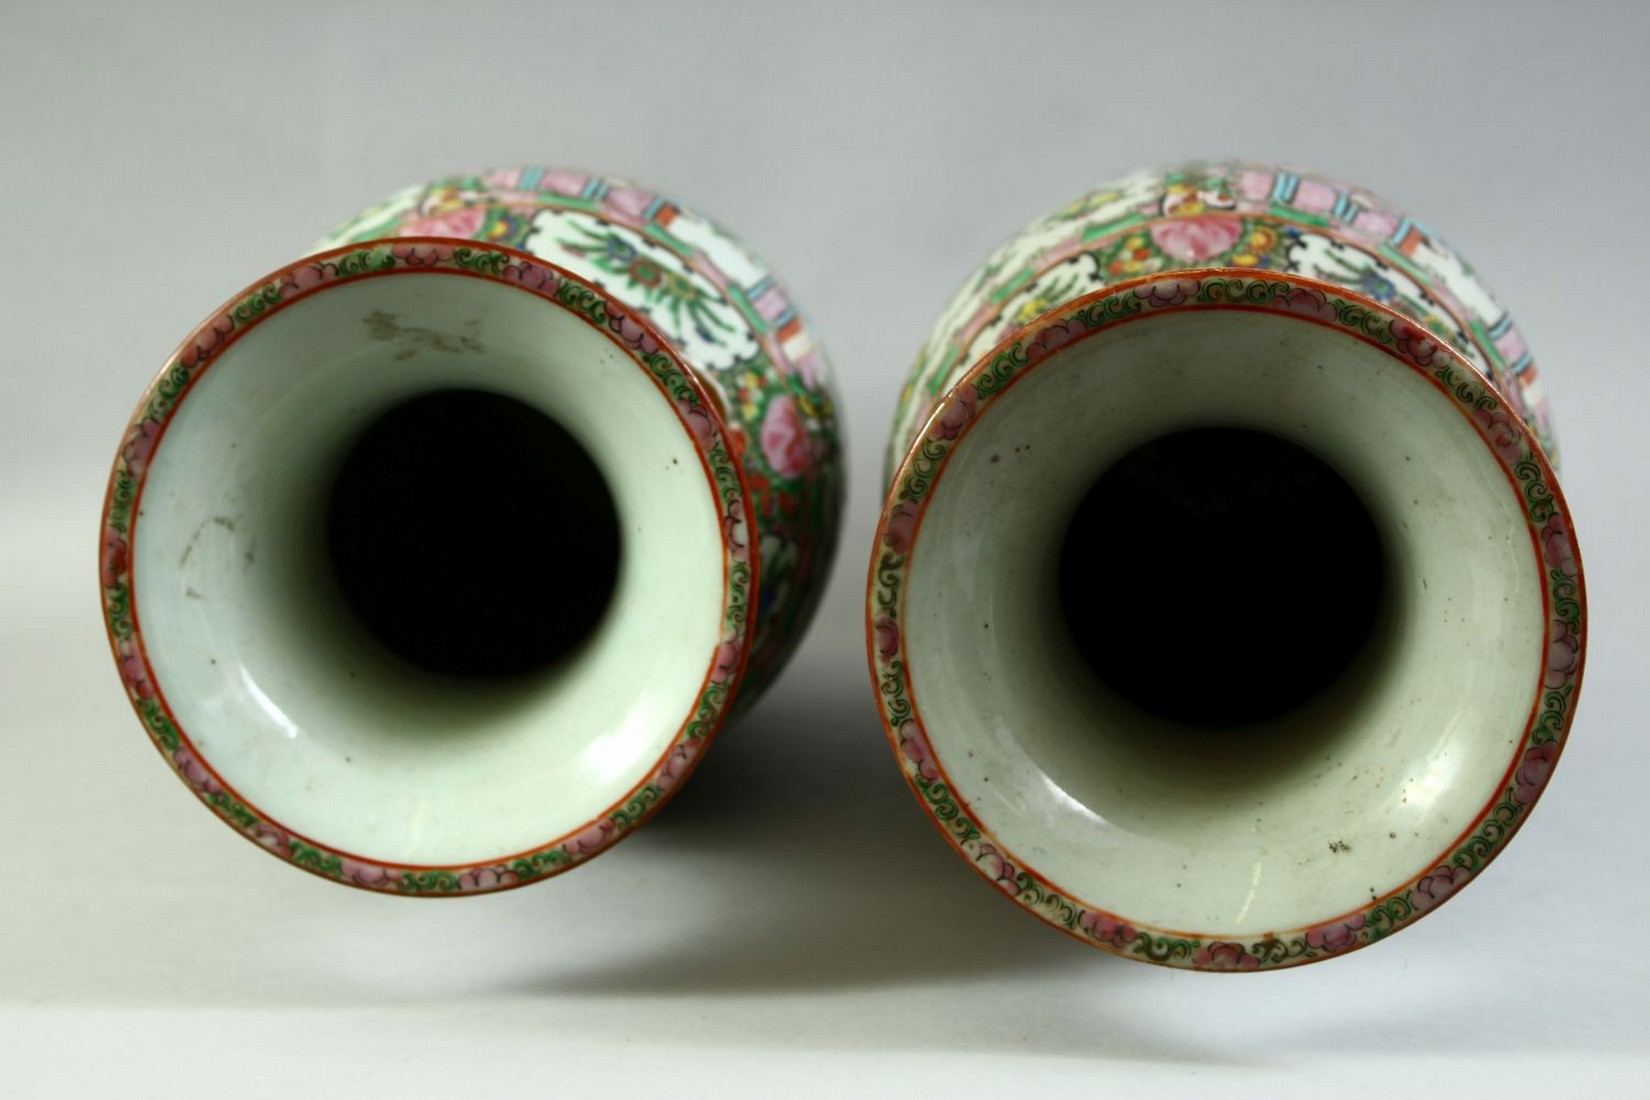 A PAIR OF CHINESE CANTON FAMILLE ROSE PORCELAIN VASES, the body of each painted with panels of - Image 6 of 7